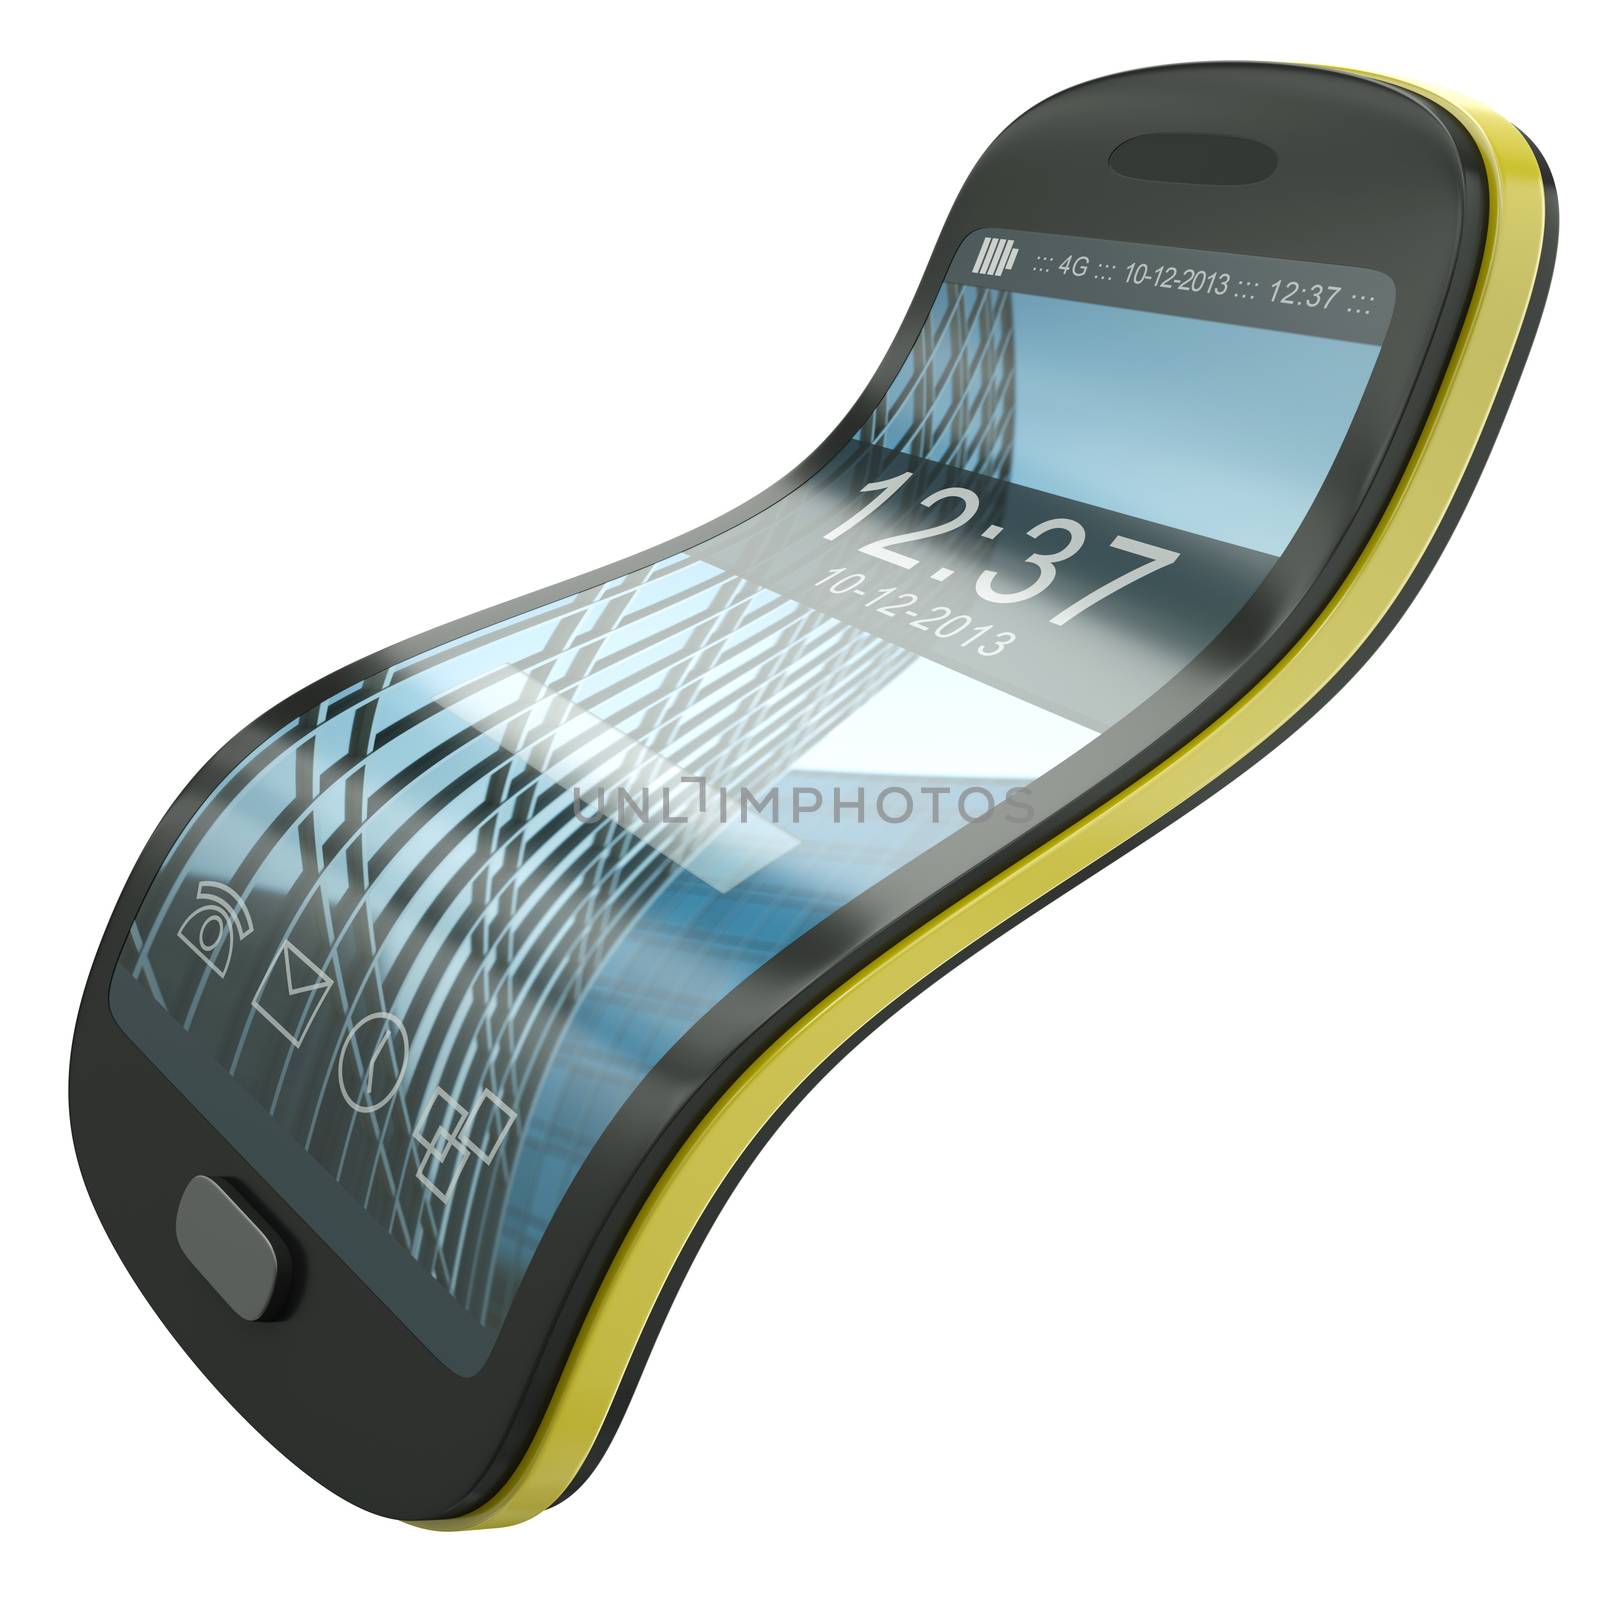 Flexible smartphone, concept illustration. The screen layout design, including icons and background artwork was created by me.